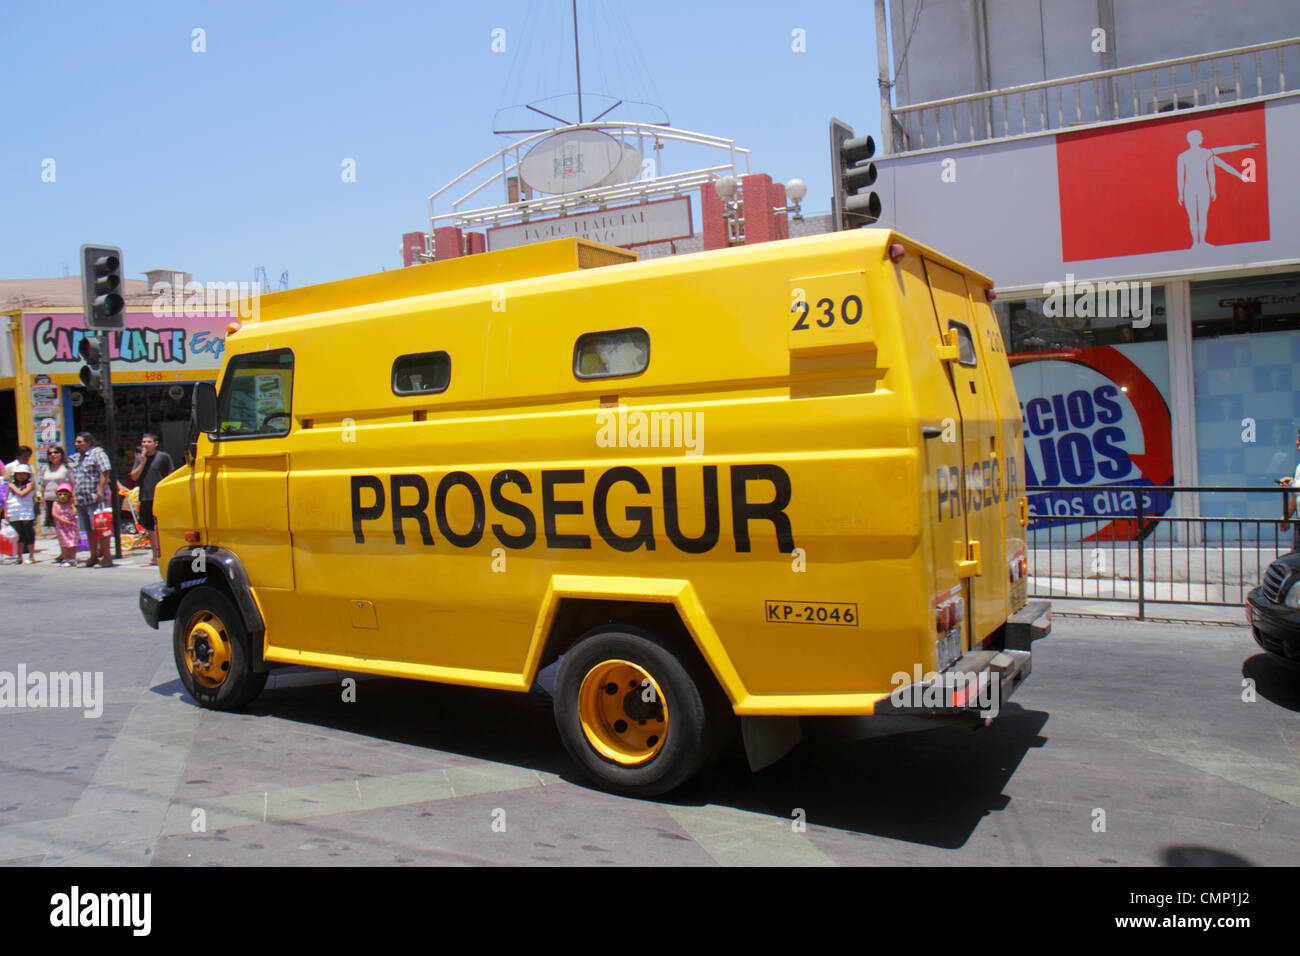 Arica Chile,street scene,Prosegur,global security service provider,Spanish company,armored truck,logo,valuables,cash transport,banking,currency,money, Stock Photo